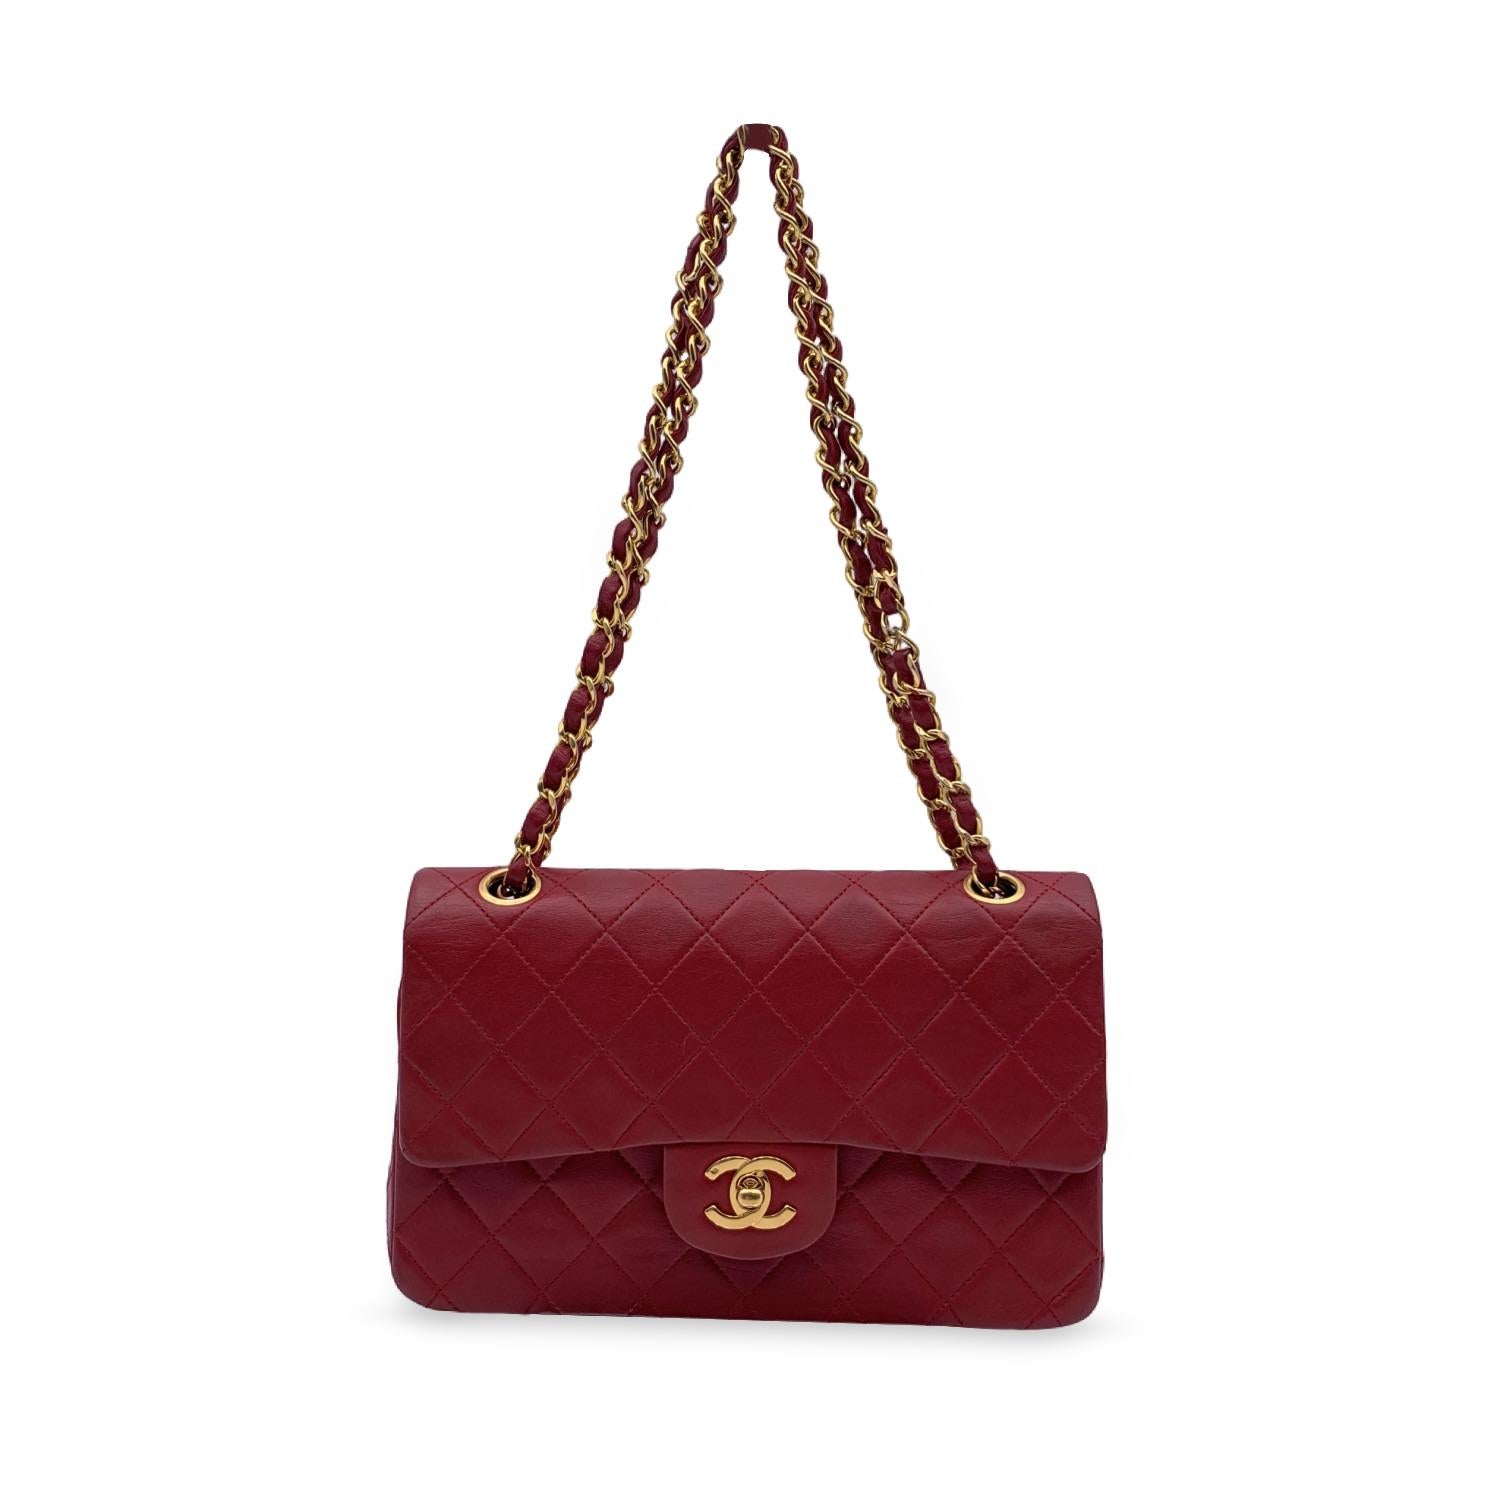 Chanel 'Timeless Classic 2.55' Quilted Double Flap 2.55 Bag in red color. Periord/Era: 1989-1991. Features double 'CC' turn lock closure and double flap interior. 1 open pocket under the flap. Gorgeous gold metal strap with interwoven leather; can